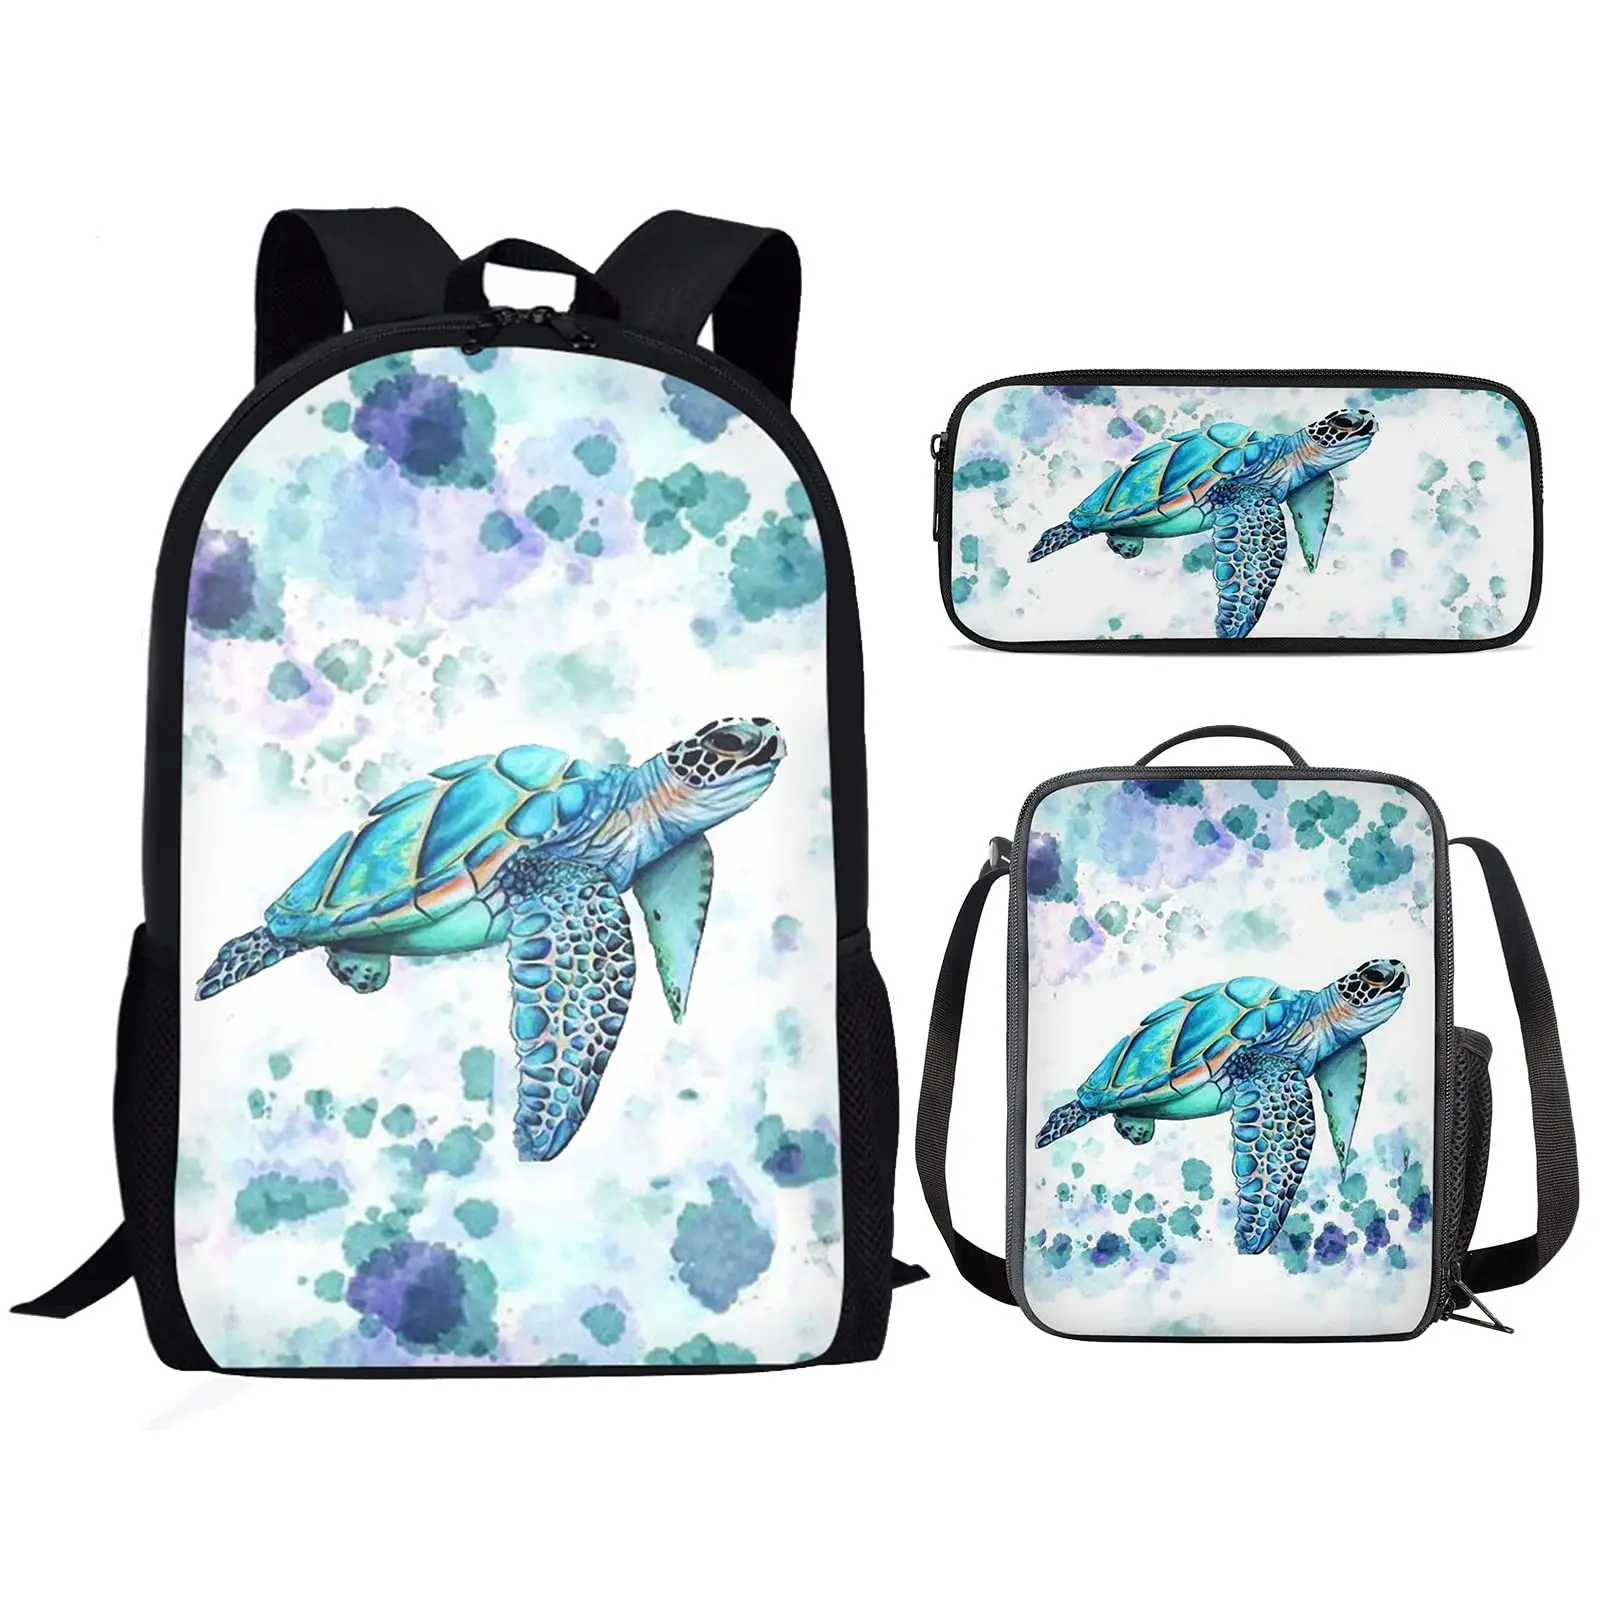 

Watercolor Sea Turtle School Backpack for Kids Elementary School Bag with Lunch Box Pencil Case Teens Bookbags 3pcs/set Daypack